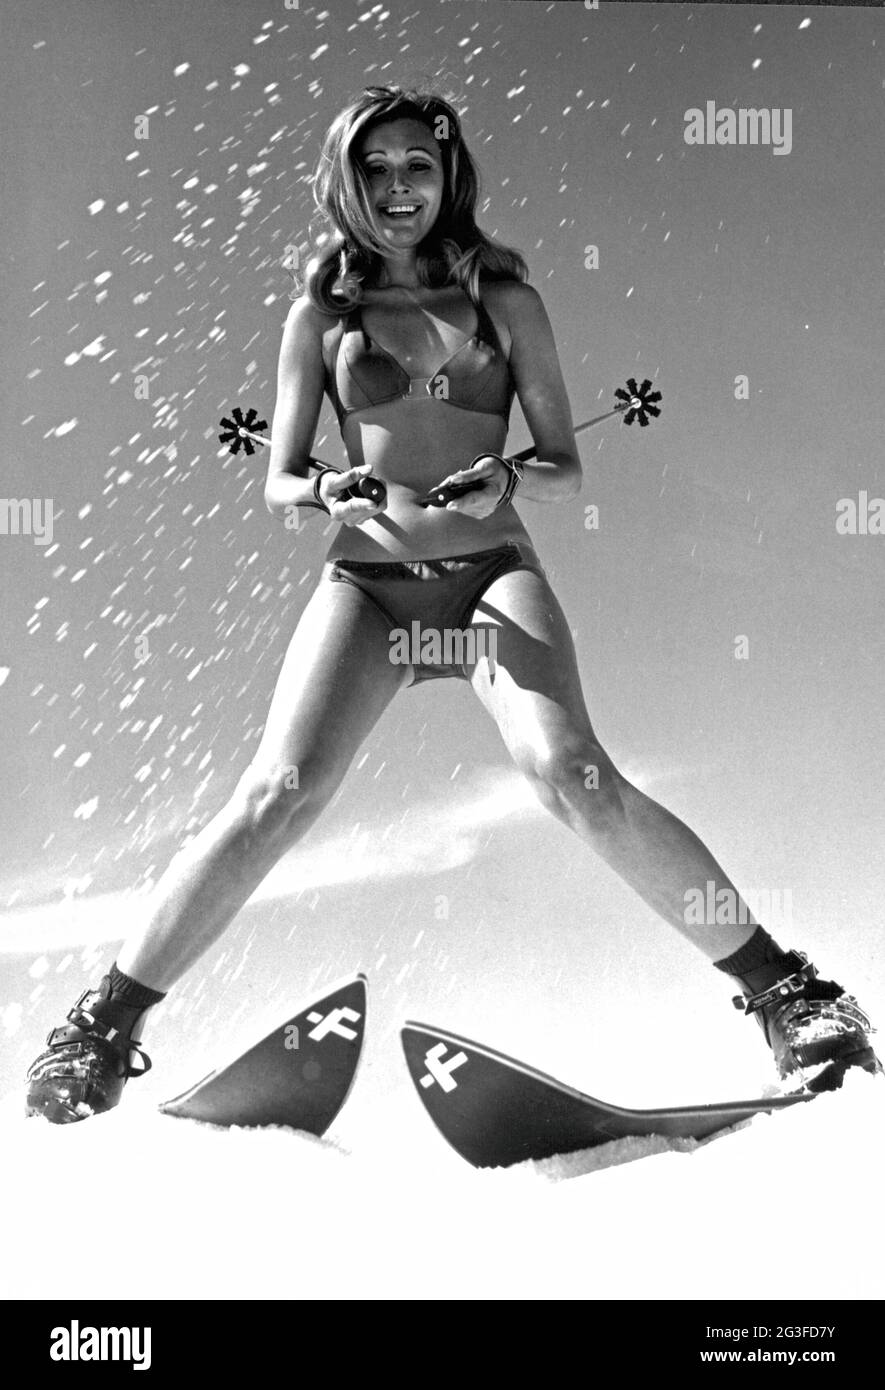 Bathing suit 1960's Black and White Stock Photos & Images - Alamy